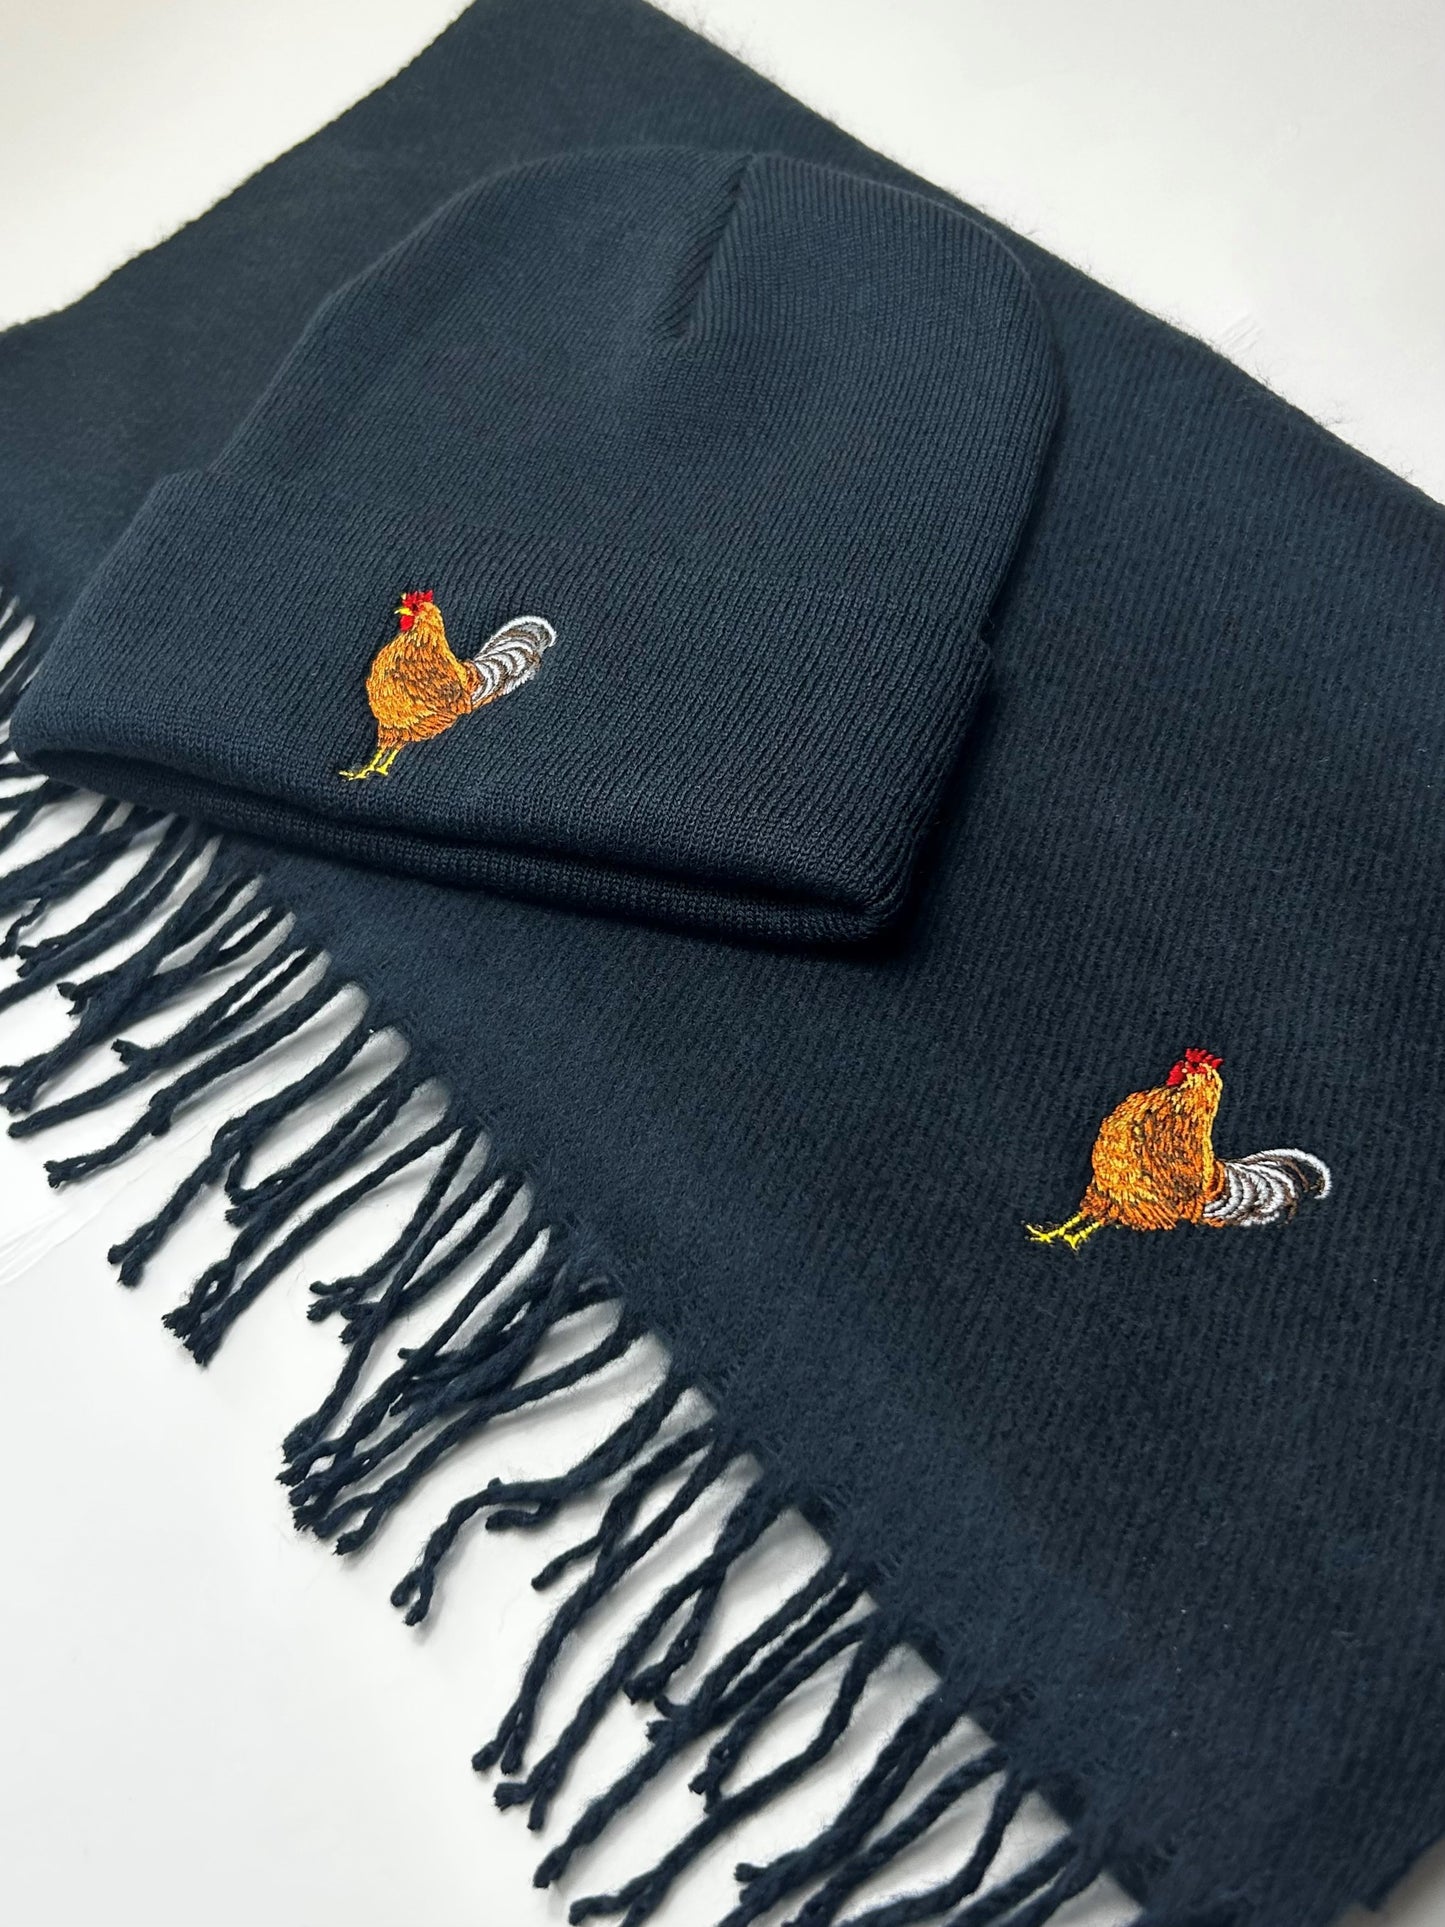 Thread and Needles Co Chicken Embroidered Matching Scarf and Hat Set